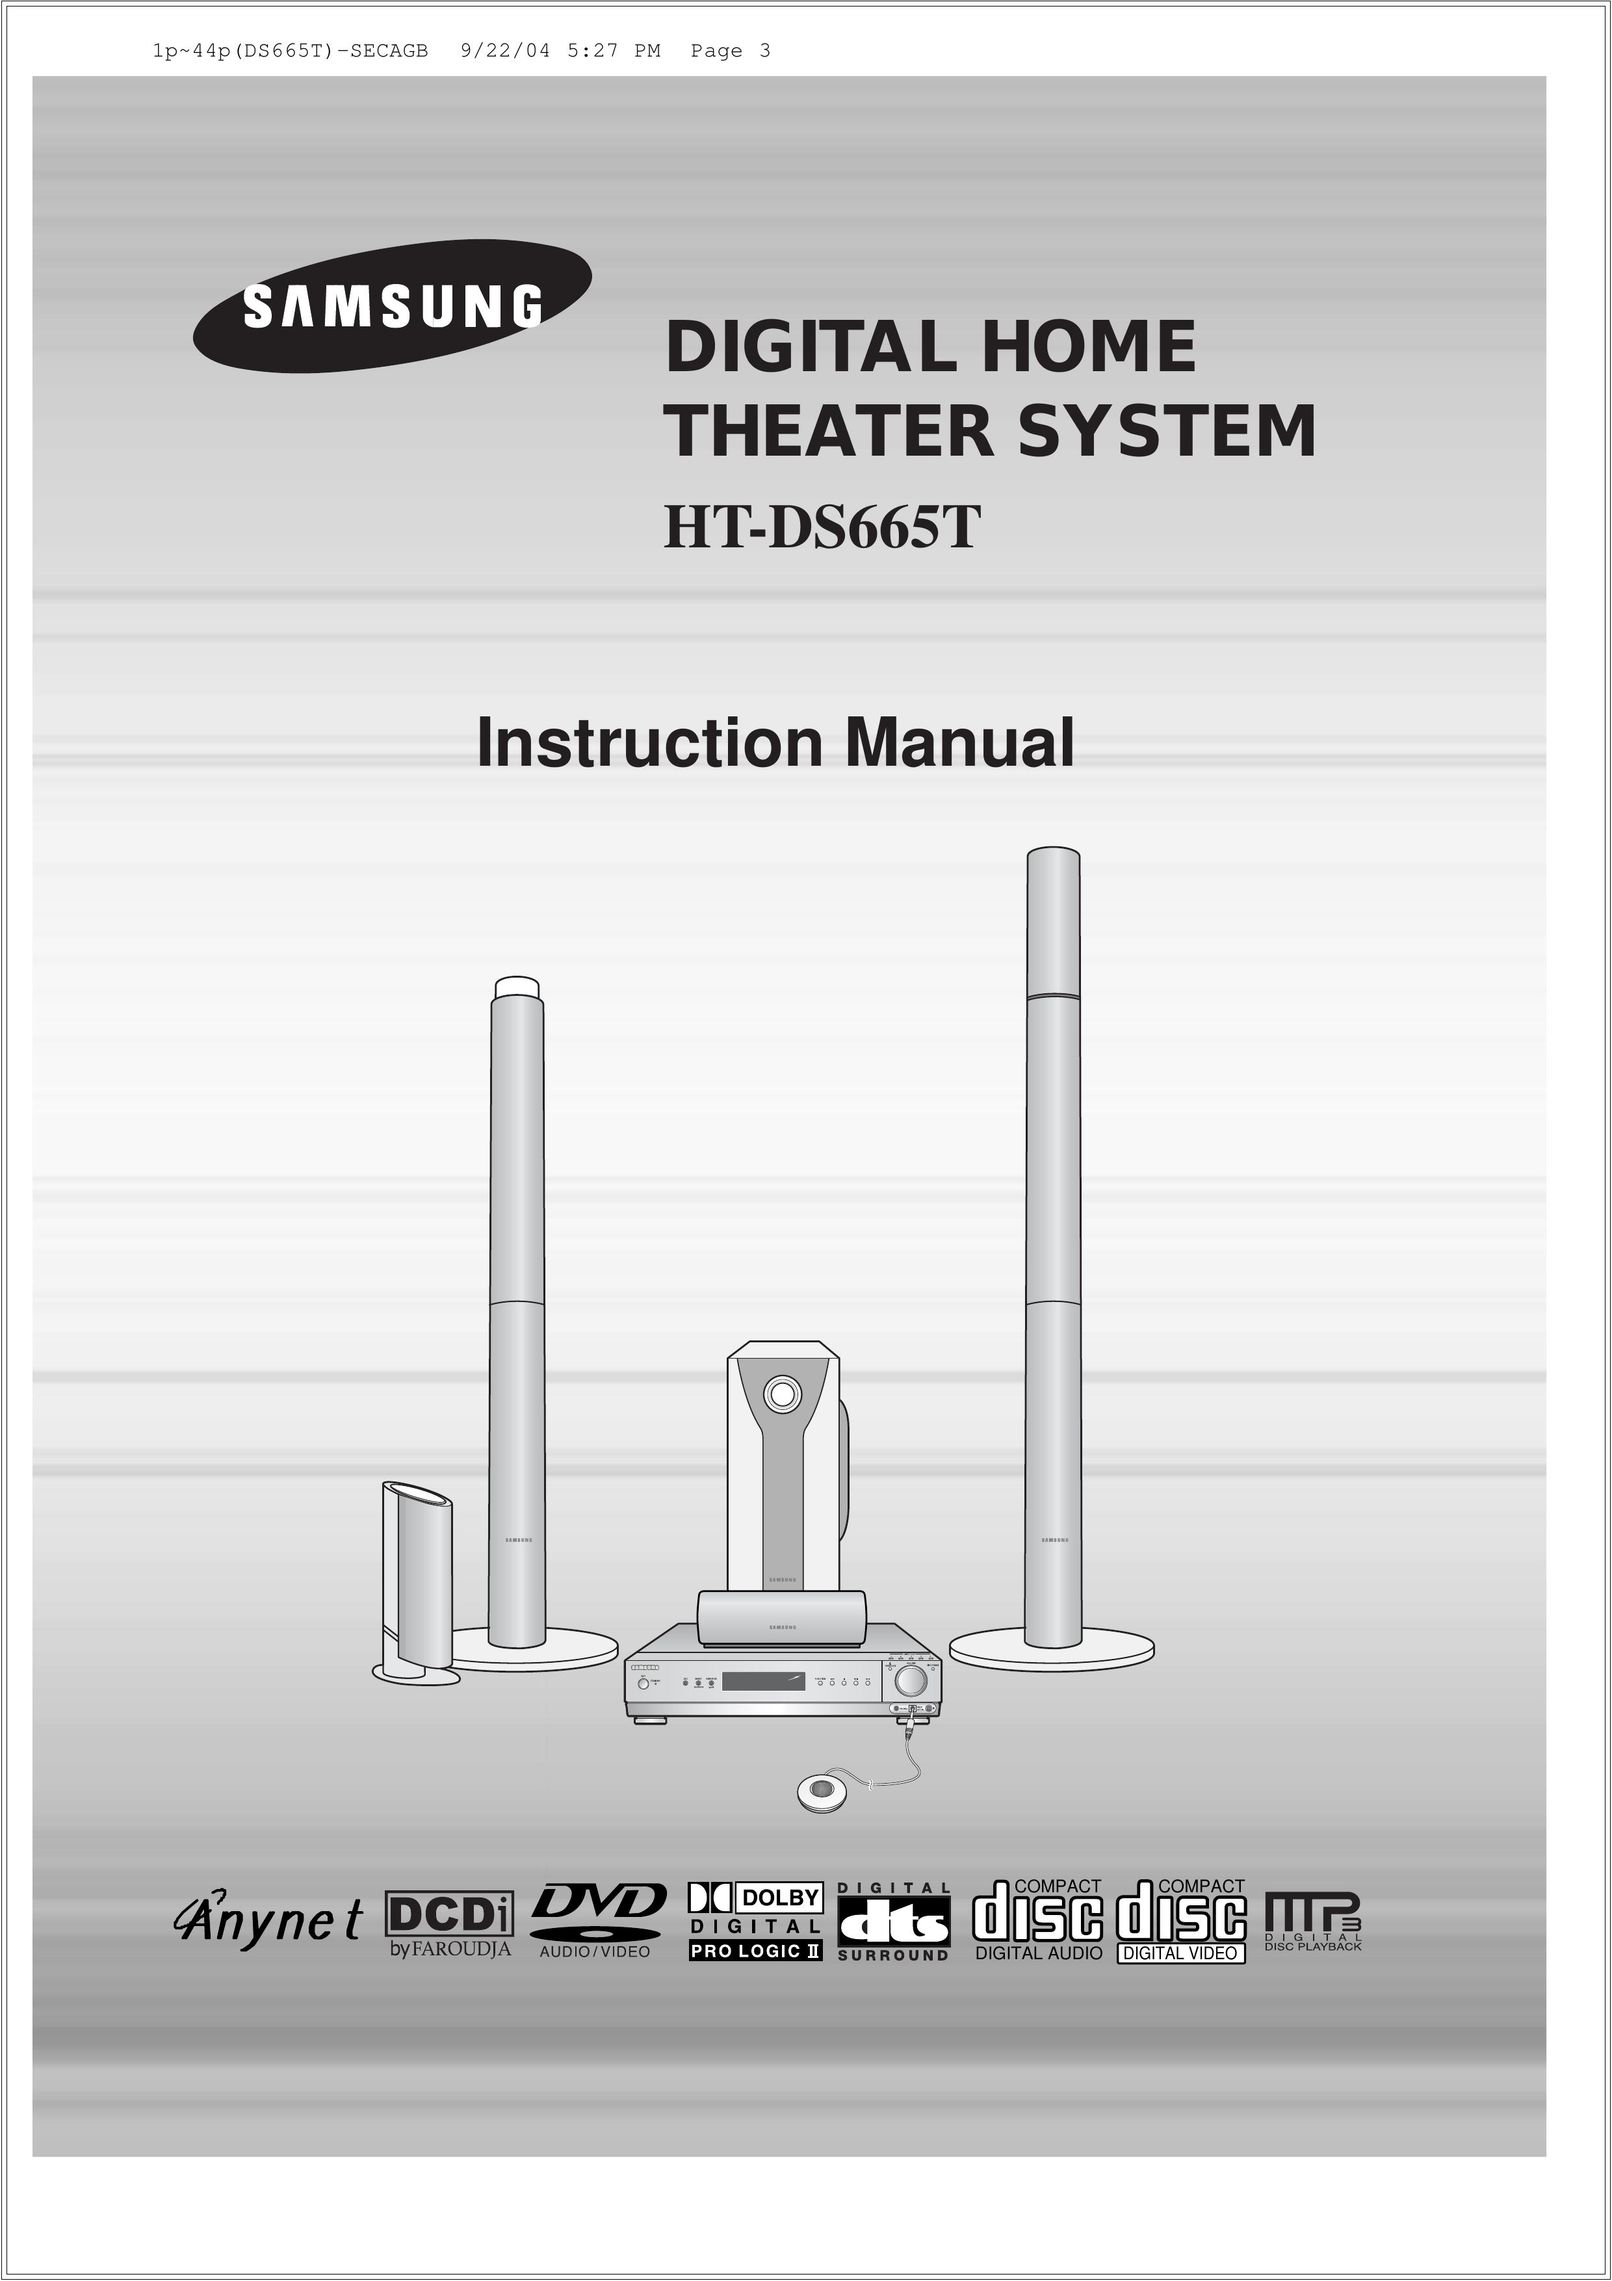 Samsung 20051111115925328 Home Theater System User Manual